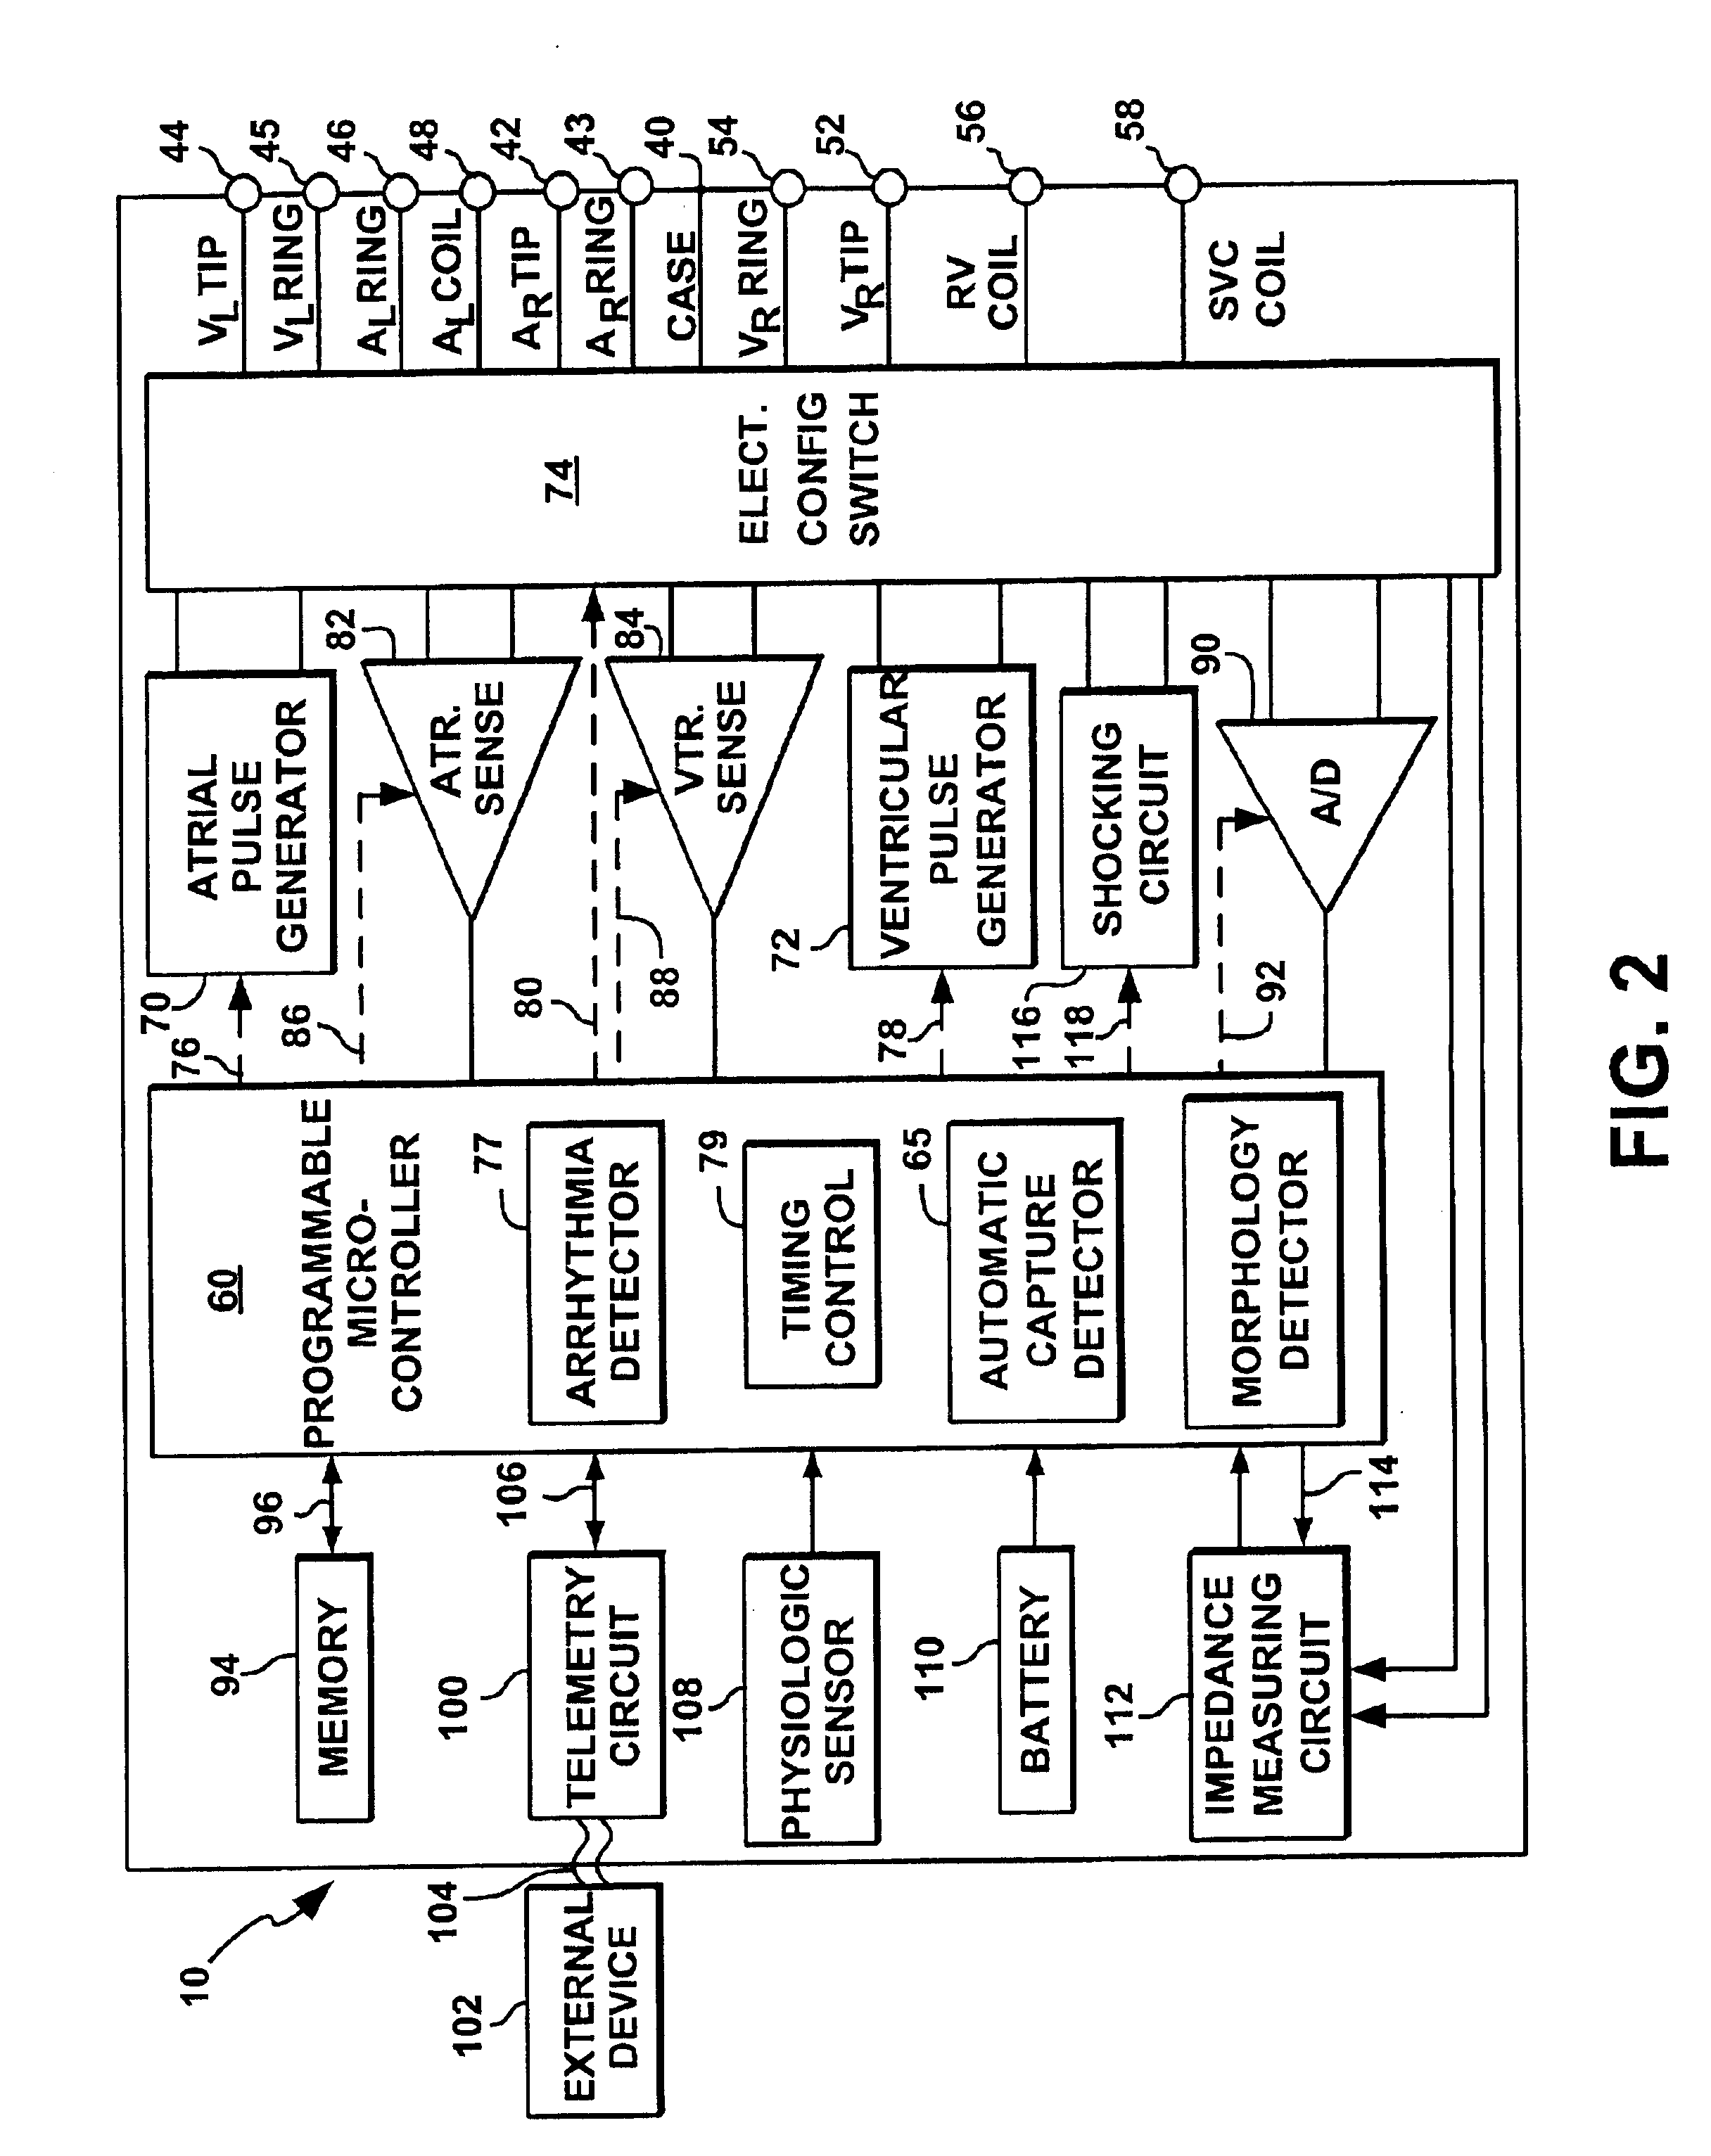 Automatic capture using independent channels in bi-chamber stimulation